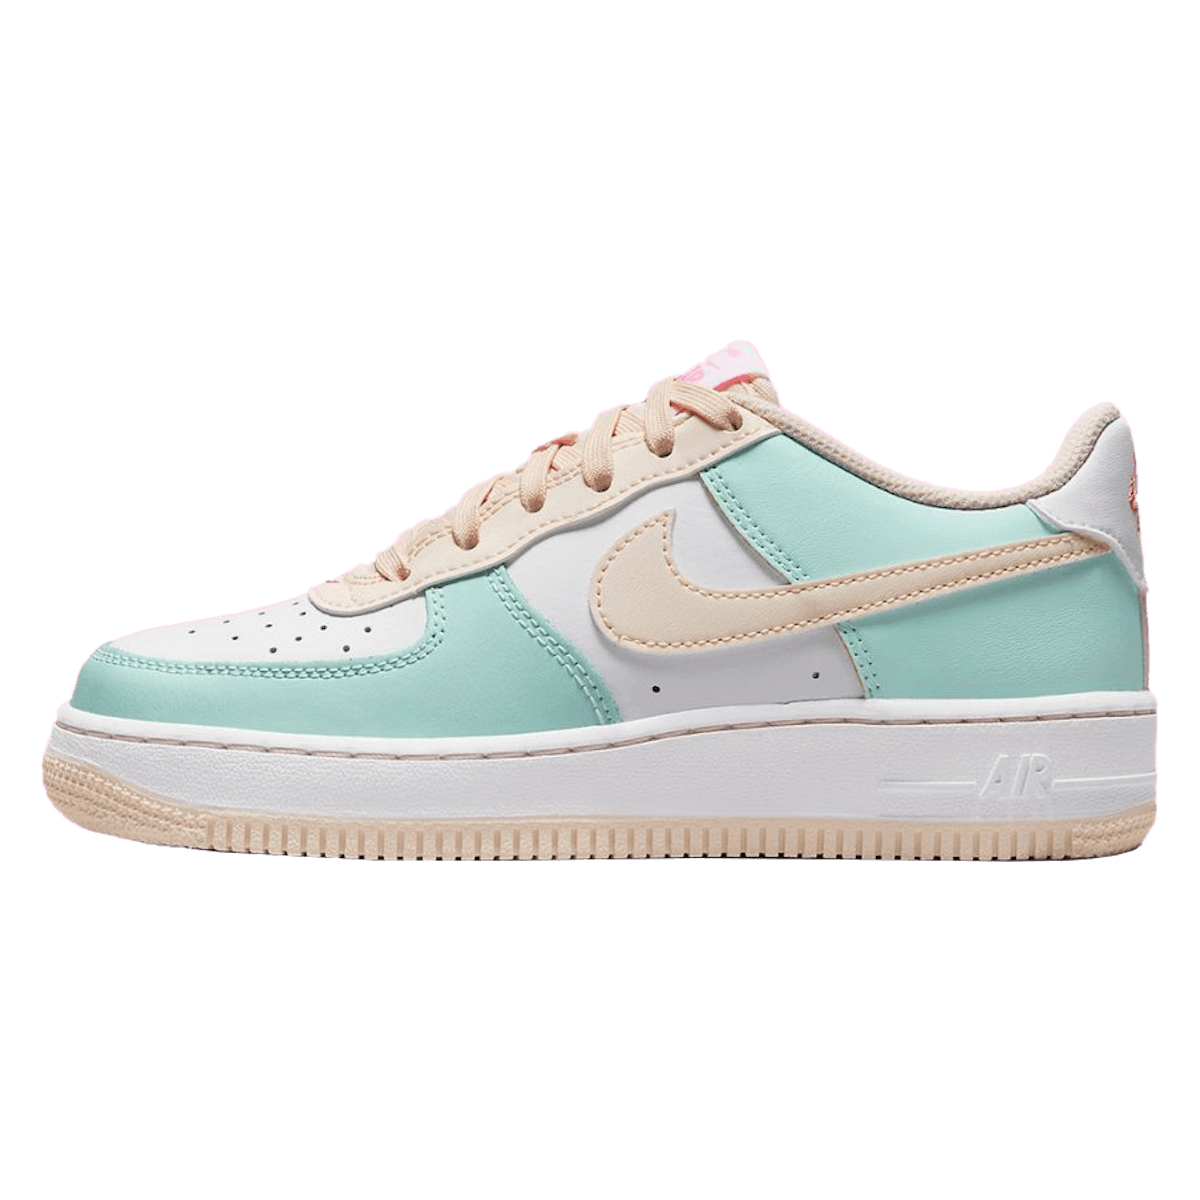 Nike Air Force 1 Low GS "Emerald Rise"